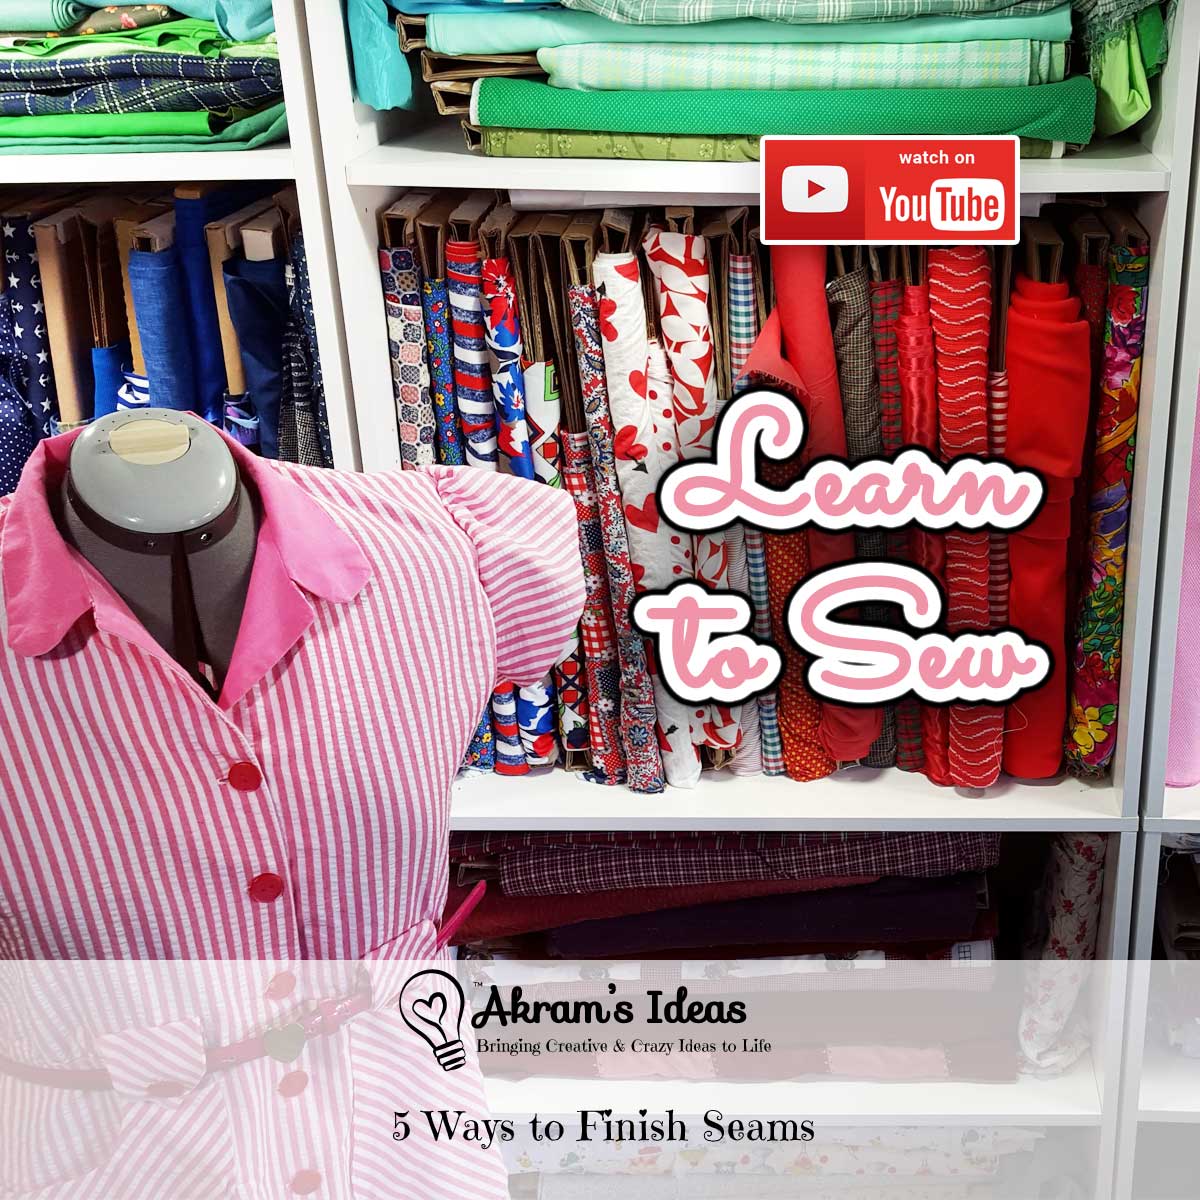 Akram's Ideas: Learn to Sew - 5 Ways to Finish Seams